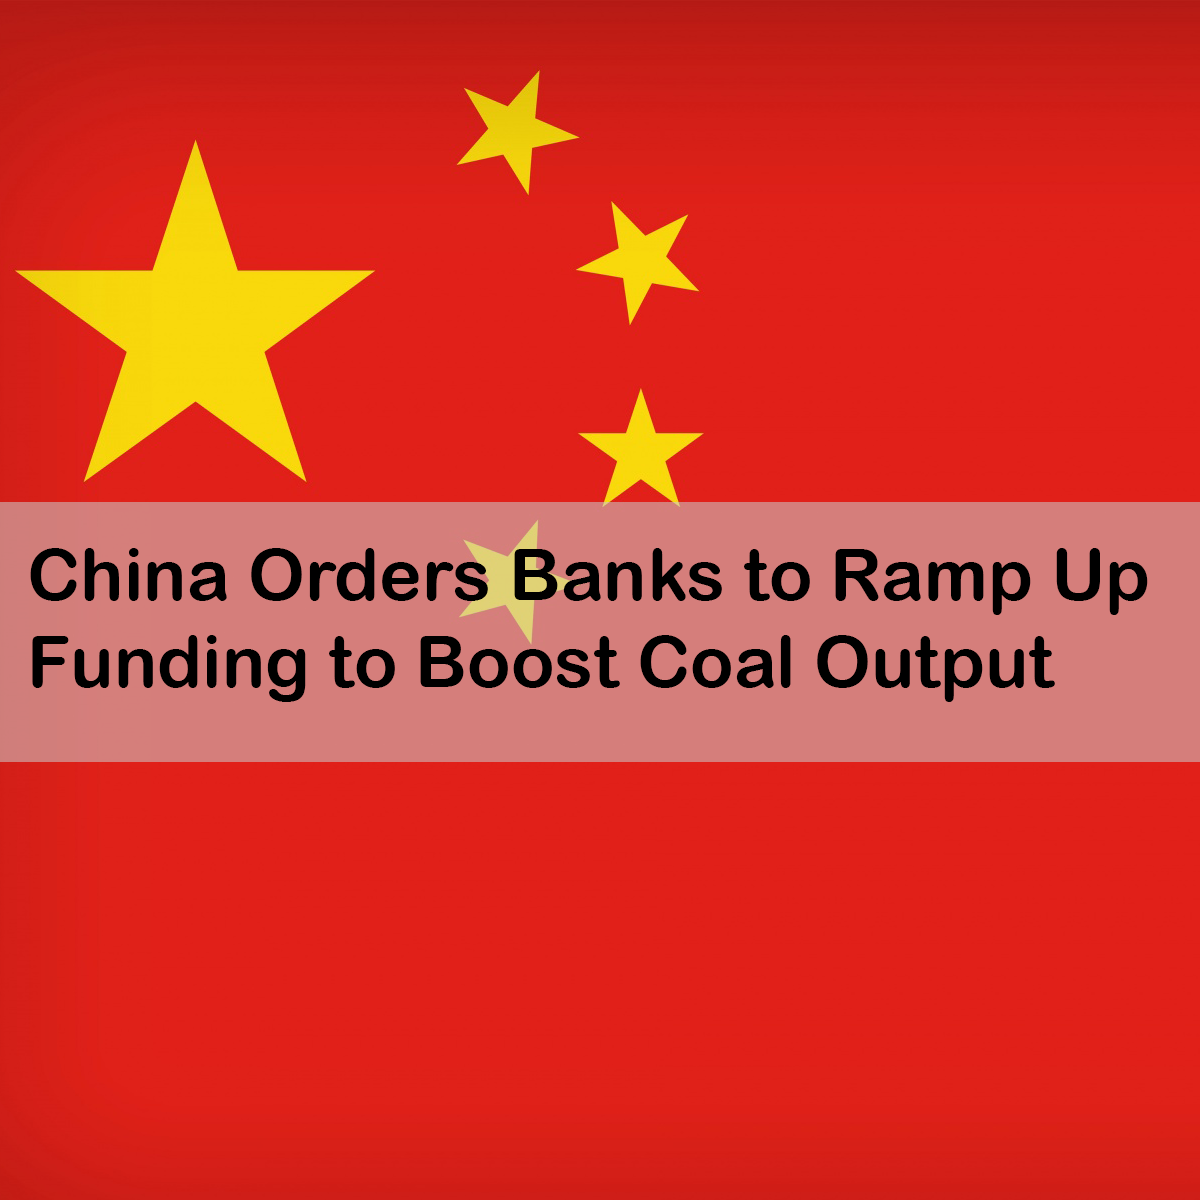 China Orders Banks to Ramp Up Funding to Boost Coal Output